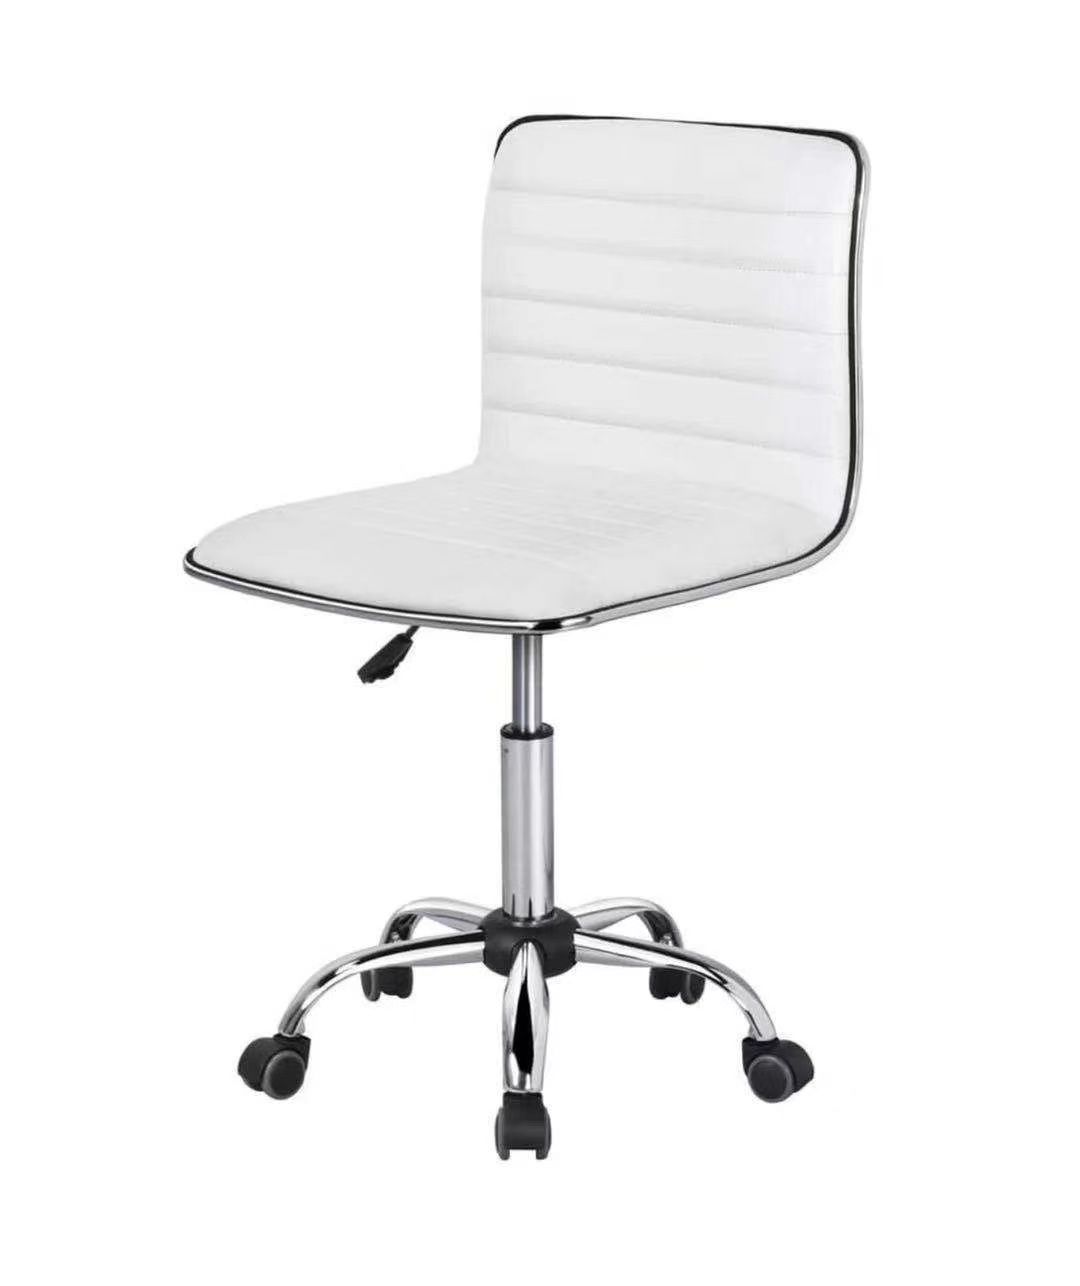 Adjustable Task Chair PU Leather Low Back Ribbed Armless Swivel White Desk Chair Office Chair Wheels 591530